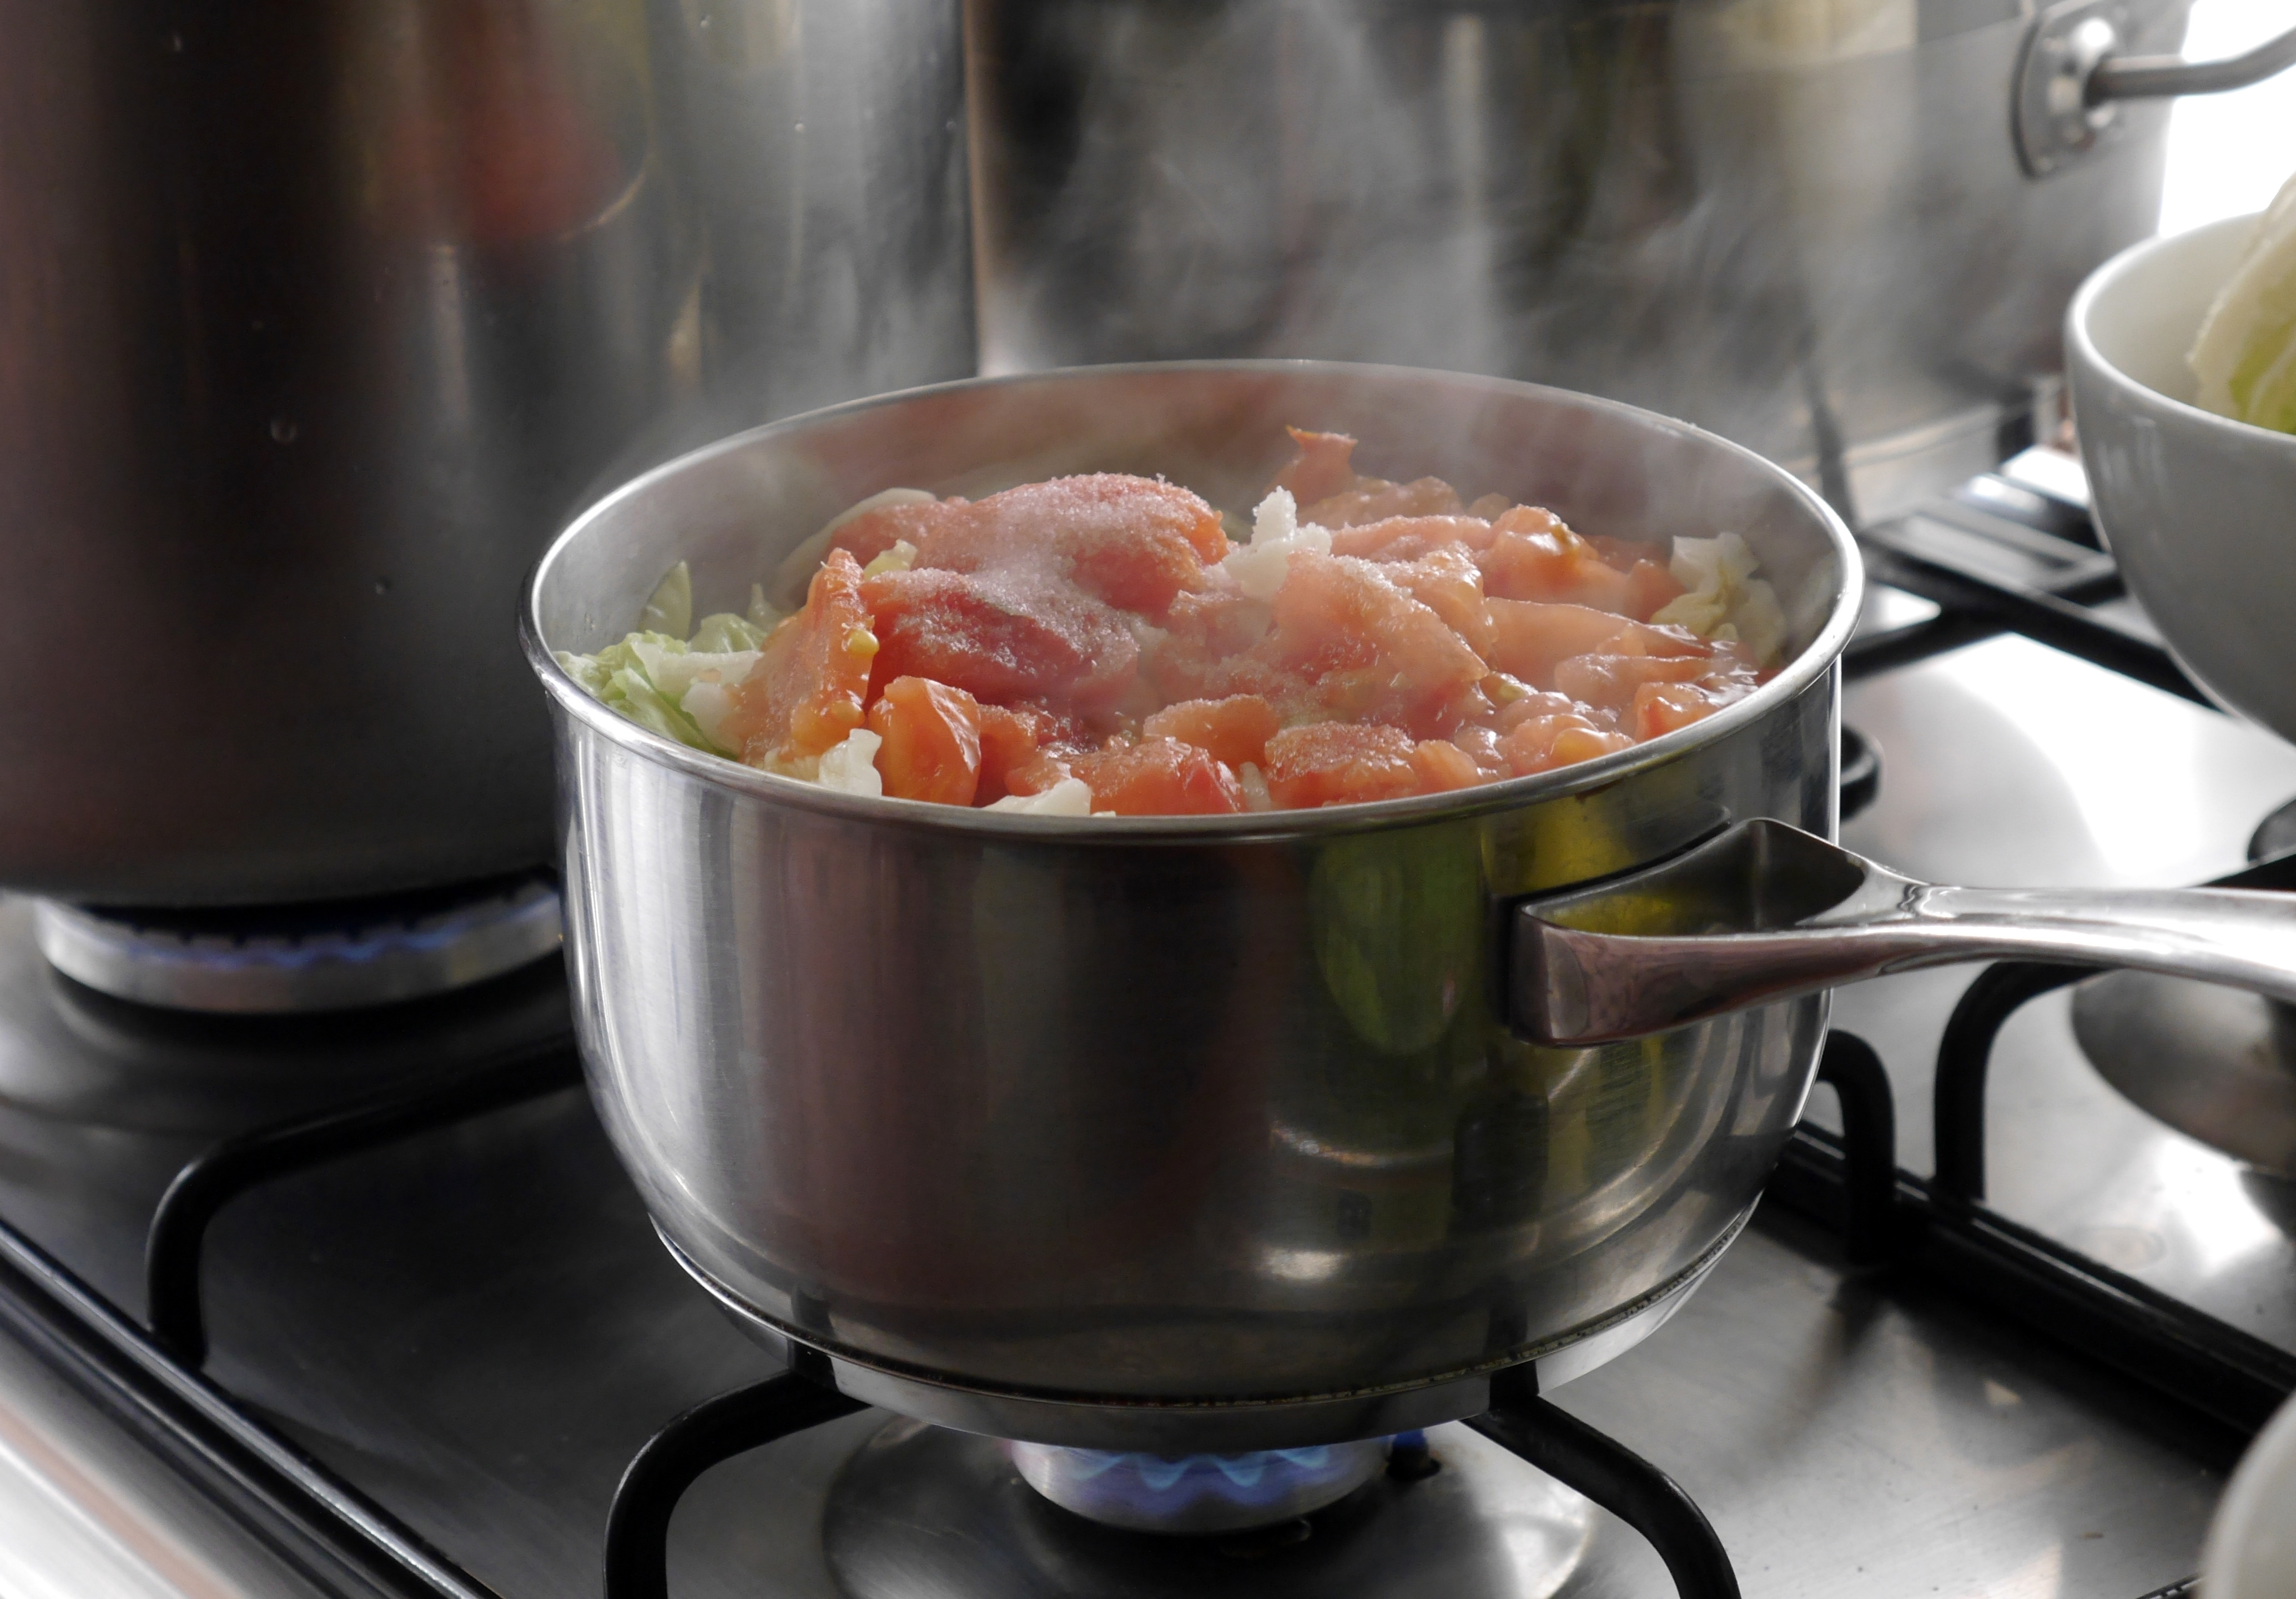 Cooking Food In Large Frying Pan Free Stock Photo - Public Domain Pictures